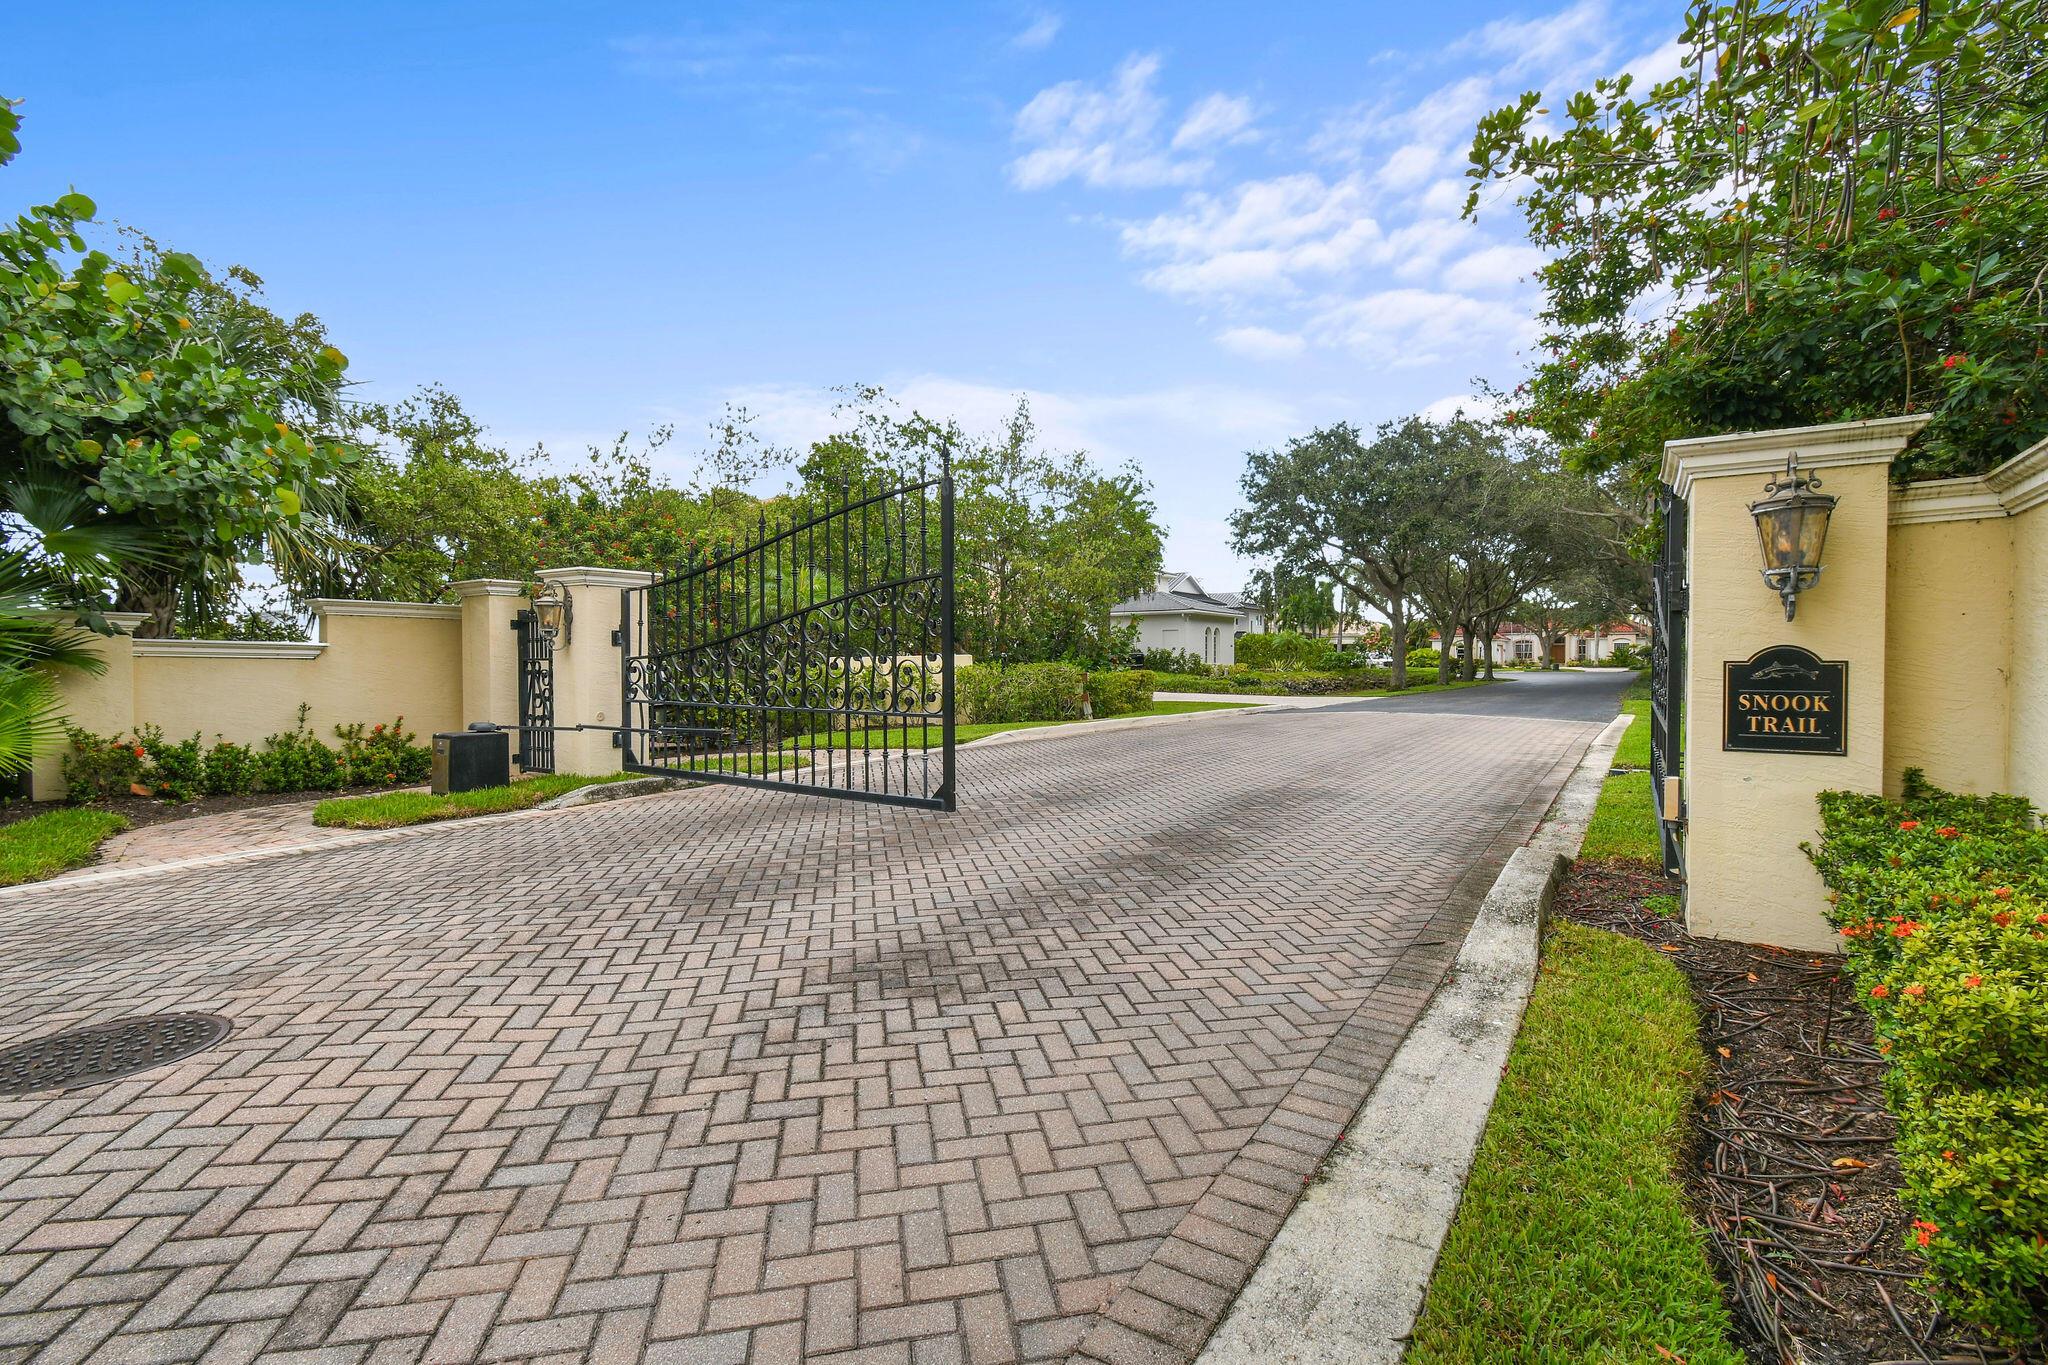 A secluded, oversized homesite in the prestigious and rarely available enclave of Snook Hole, directly on the Intracoastal Waterway with 100 feet of waterfrontage. In this gated and highly coveted location in Palm Beach Gardens, this large homesite is nestled at the end of a low-density cul-de-sac and surrounded by lush greenery. Perfect for the ultimate outdoor and boating lifestyle, the private dock is equipped with electricity and water and can host up to a 70' vessel. This ample amount of serene waterfront space would accommodate a large new construction residence, affording the ideal circumstances for a perfectly designed oasis customized to your unique specifications. Or entertain the existing building and undergo your own personalized upgrades and charm. Easterly views with sunrises and ocean breezes. The current estate boasts the same waterfront views from the wall of east-facing windows. An open floorplan allows for both formal and casual living/dining spaces, flow-through entertainment, views from every angle and floods of natural light. A gourmet kitchen and large island overlook the spacious family room with gas-lit fireplace and patio access. A primary master suite leads nothing to be desired offering a huge walk-in closet, spa bath with separate tub and shower, bidet and double vanity. Walk out to the pool area or enjoy the daily sunrise directly from the primary bedroom. Gracious guest suites flank the north side of the residence with their own walk-in closets and a jack-and-jill bath between them. A large study can be used as an office or easily transformed into a 4th bedroom, offering flexible additional space. A large patio and pool deck span the backyard with wide water views and the ocean breeze. Plenty of additional green space is available on the property to utilize for entertaining, potential expansion or new construction opportunities. Nestled in the luxurious and upscale Palm Beach Gardens, this homesite is a stone's throw to Florida's most pristine beaches and boating amenities. Bisecting PGA Boulevard with world-class golf courses, shopping and fine-dining, this location is flush with amenities and conveniences at every turn.